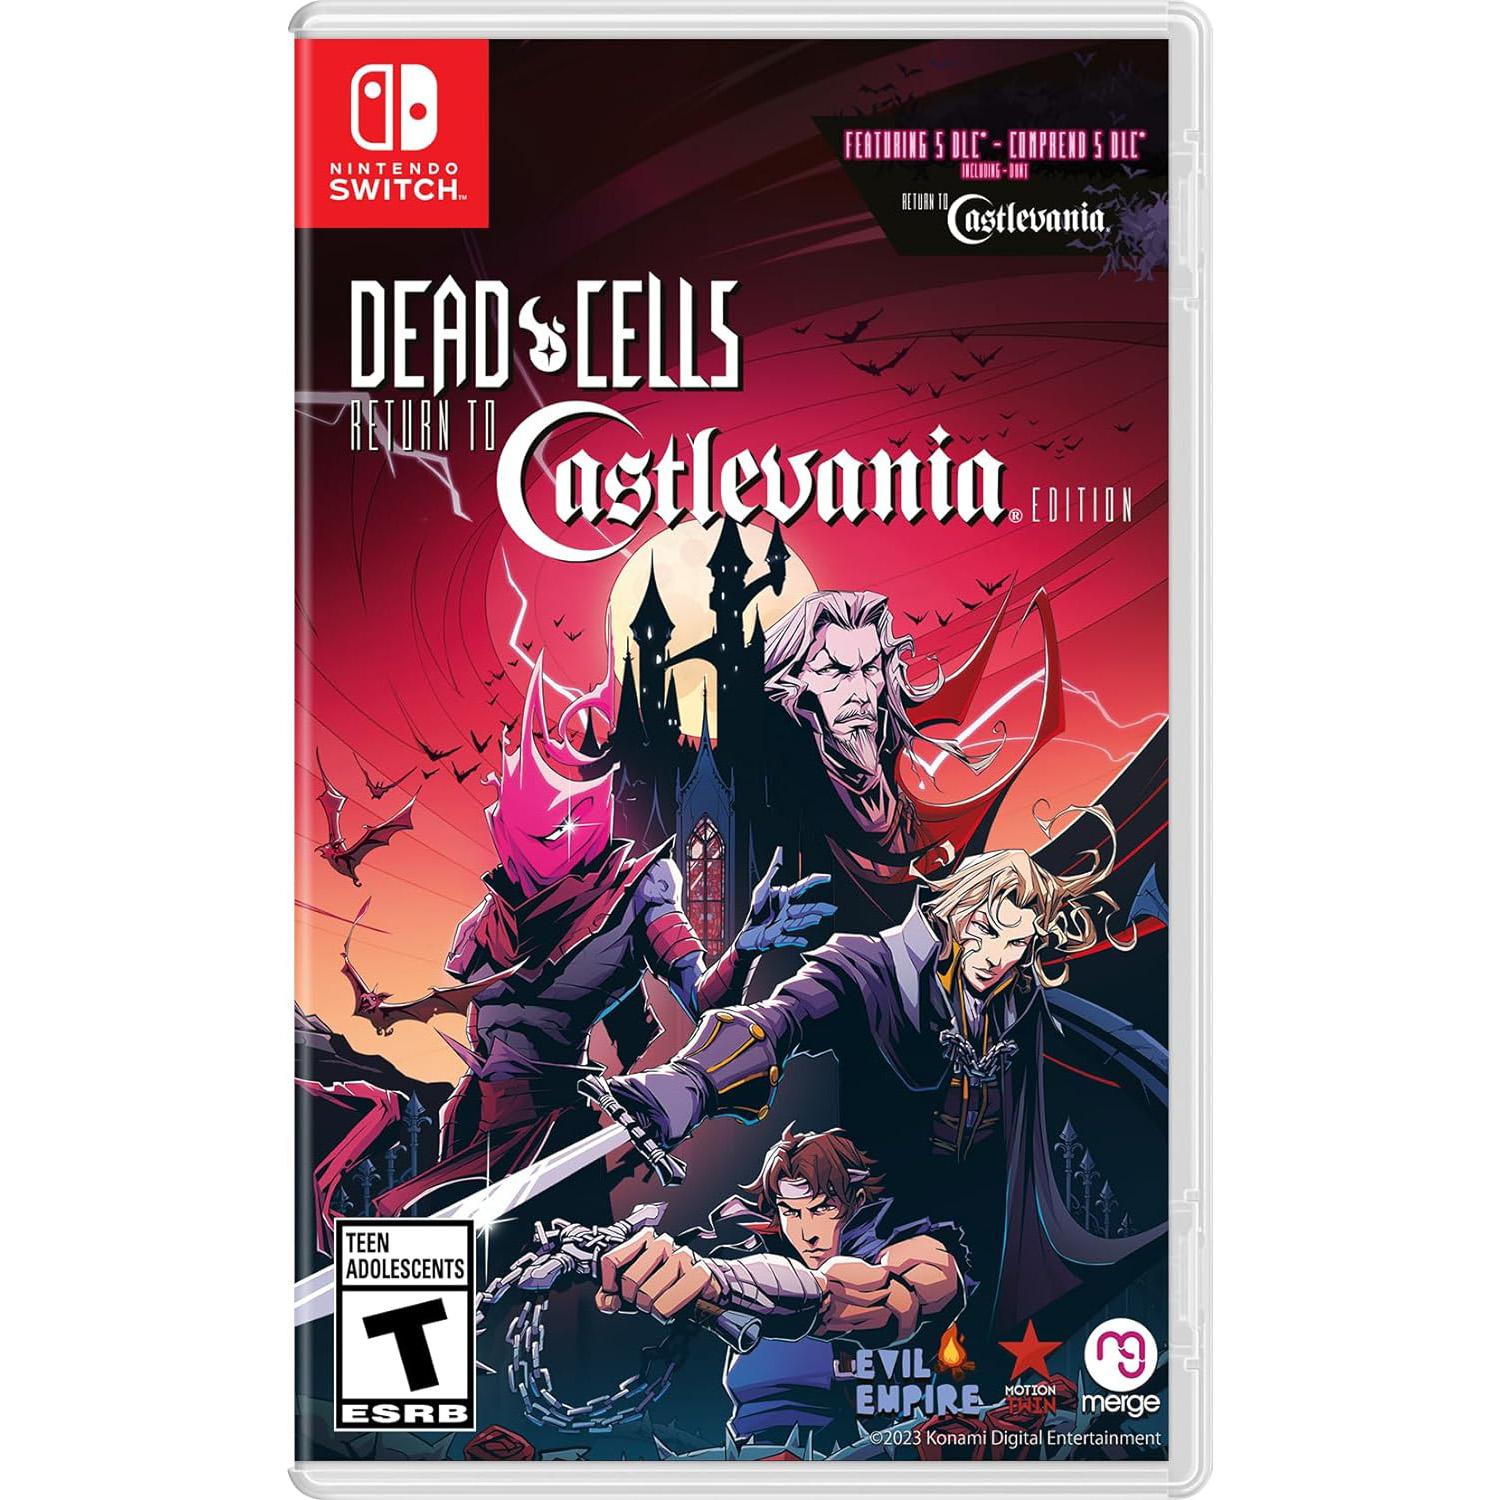 Dead Cells Return to Castlevania Edition Nintendo Switch or PS5 for $19.99